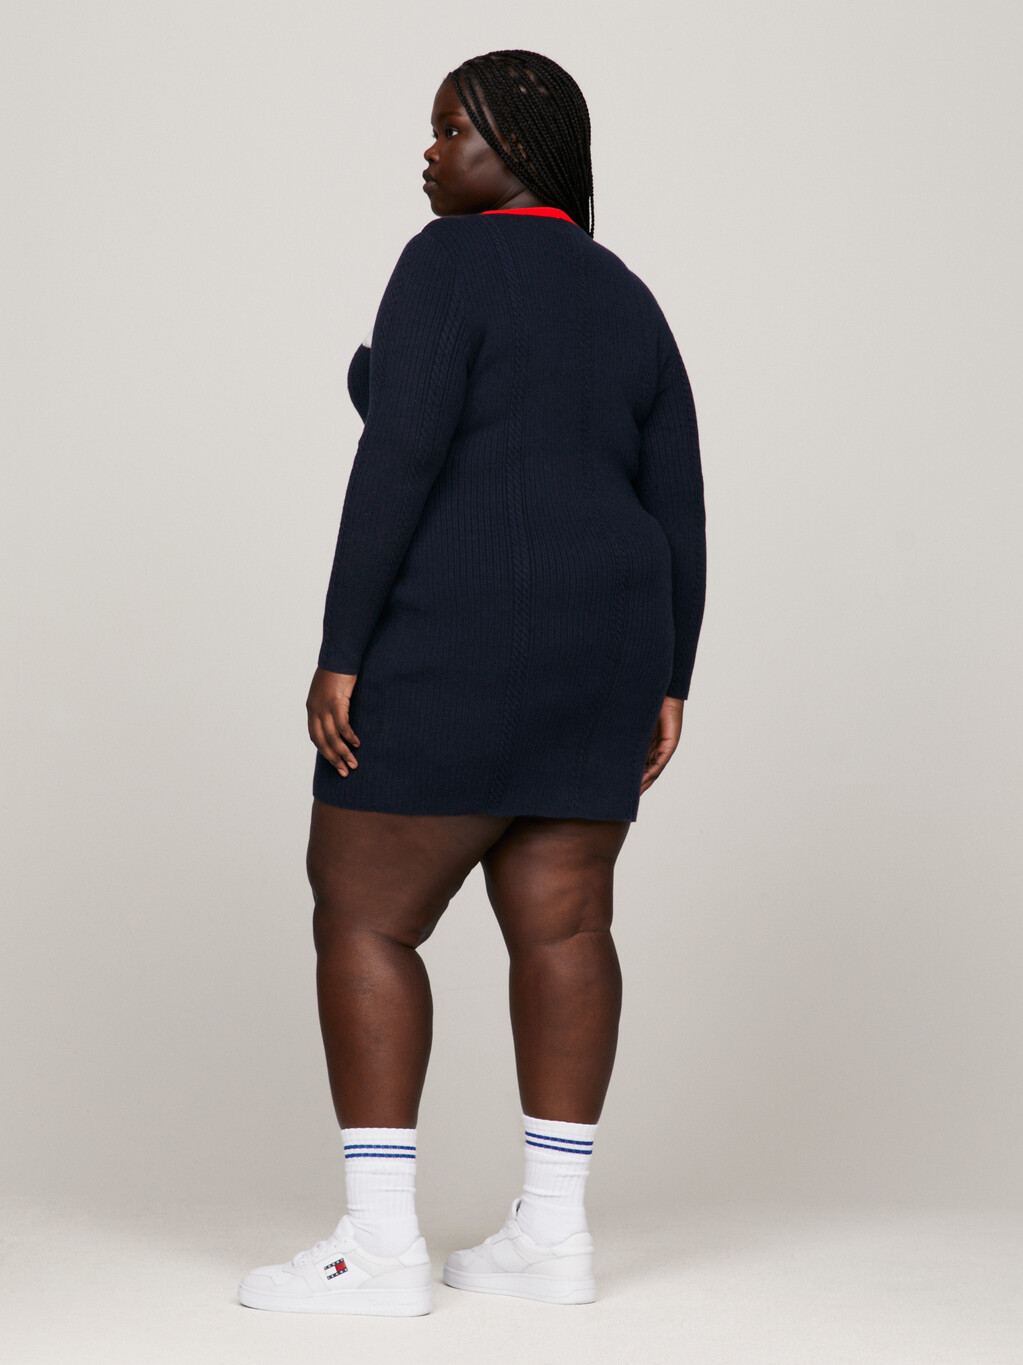 Archive Colour-Blocked Cable Knit Sweater Dress, Dark Night Navy / Multi, hi-res